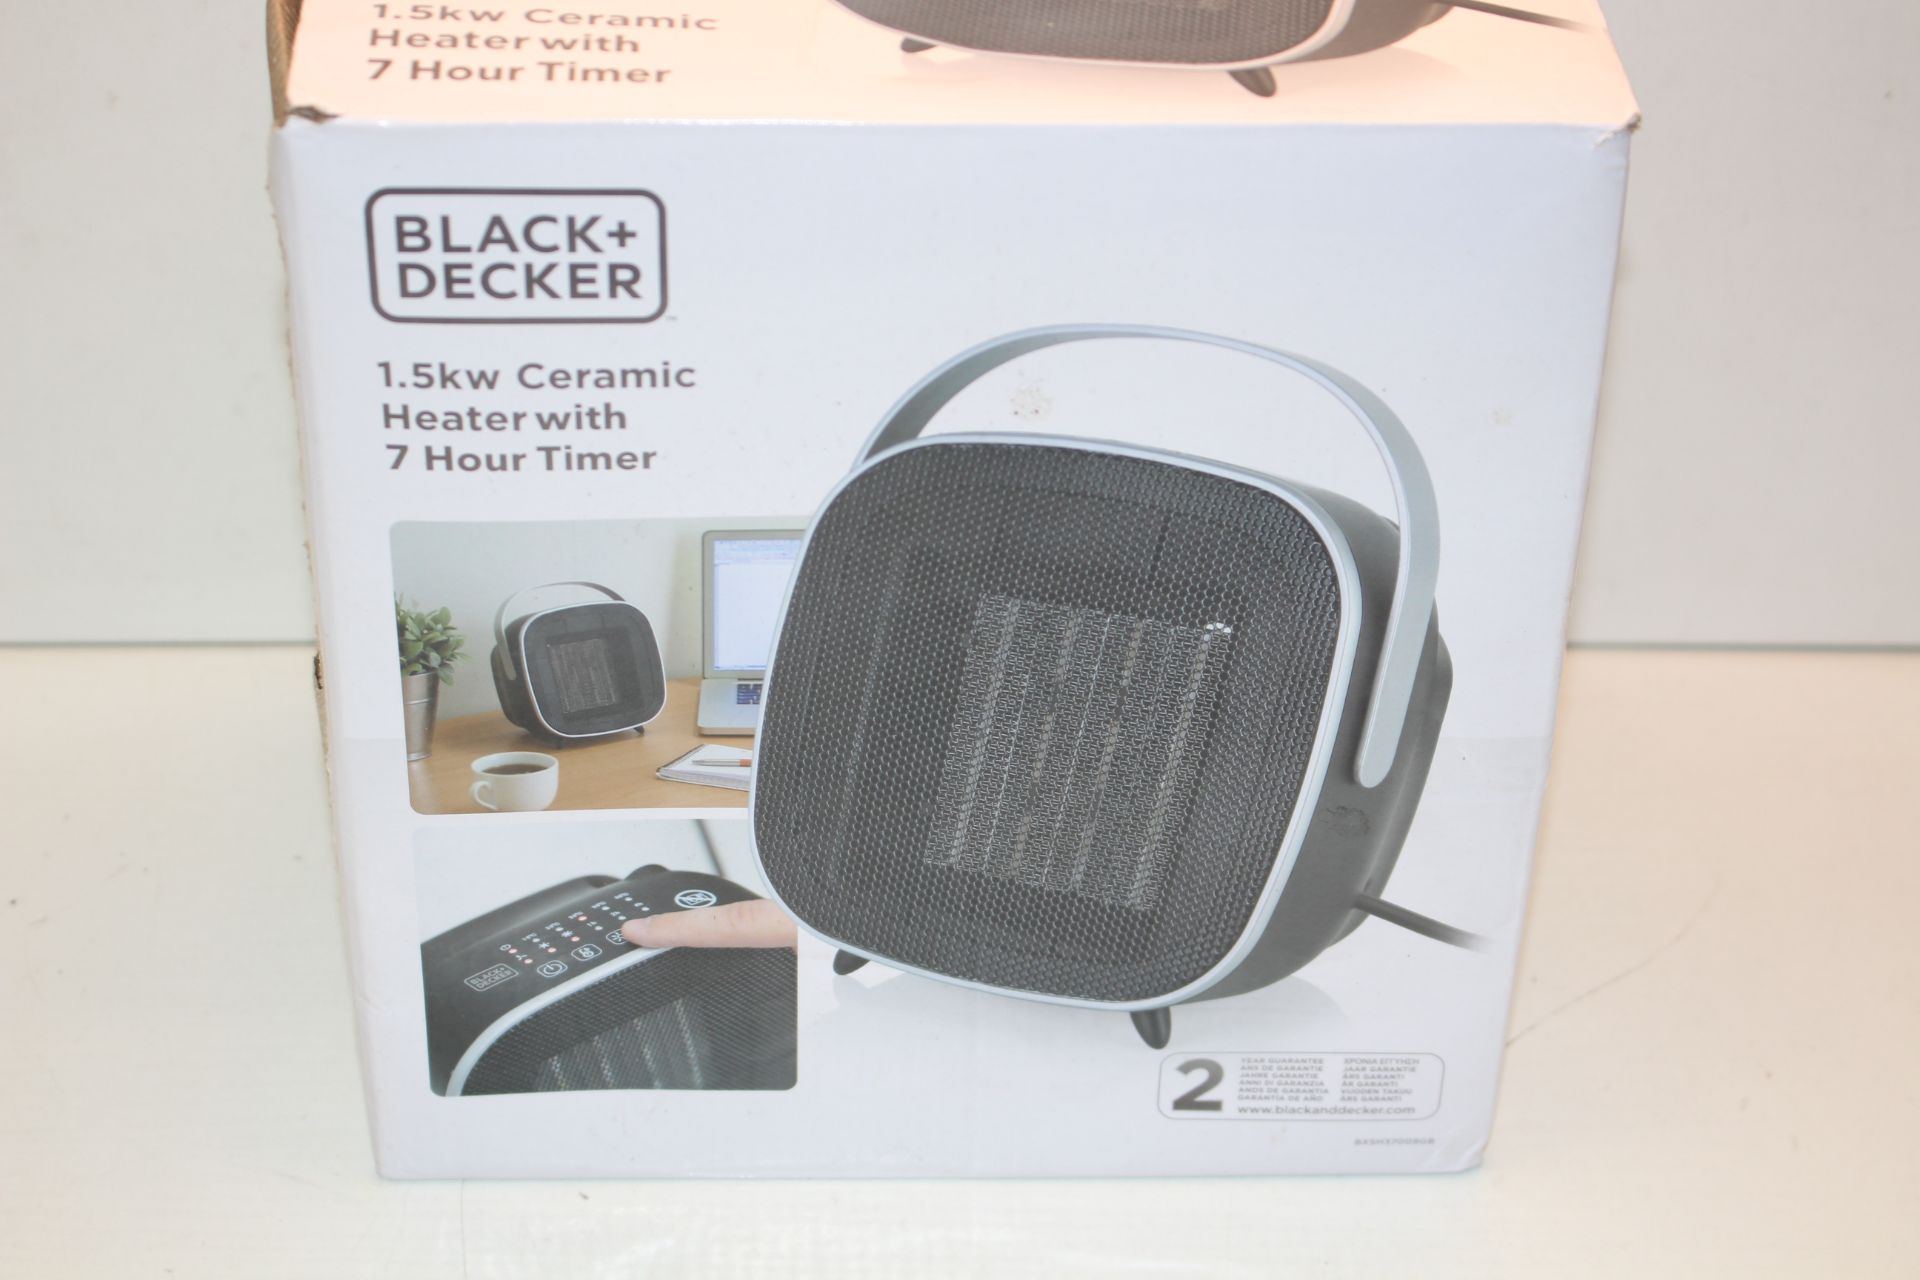 BOXED BLACK + DECKER 1.5KW CERAMIC HEATER WITH 7 HOUR TIMER RRP £34.99Condition ReportAppraisal